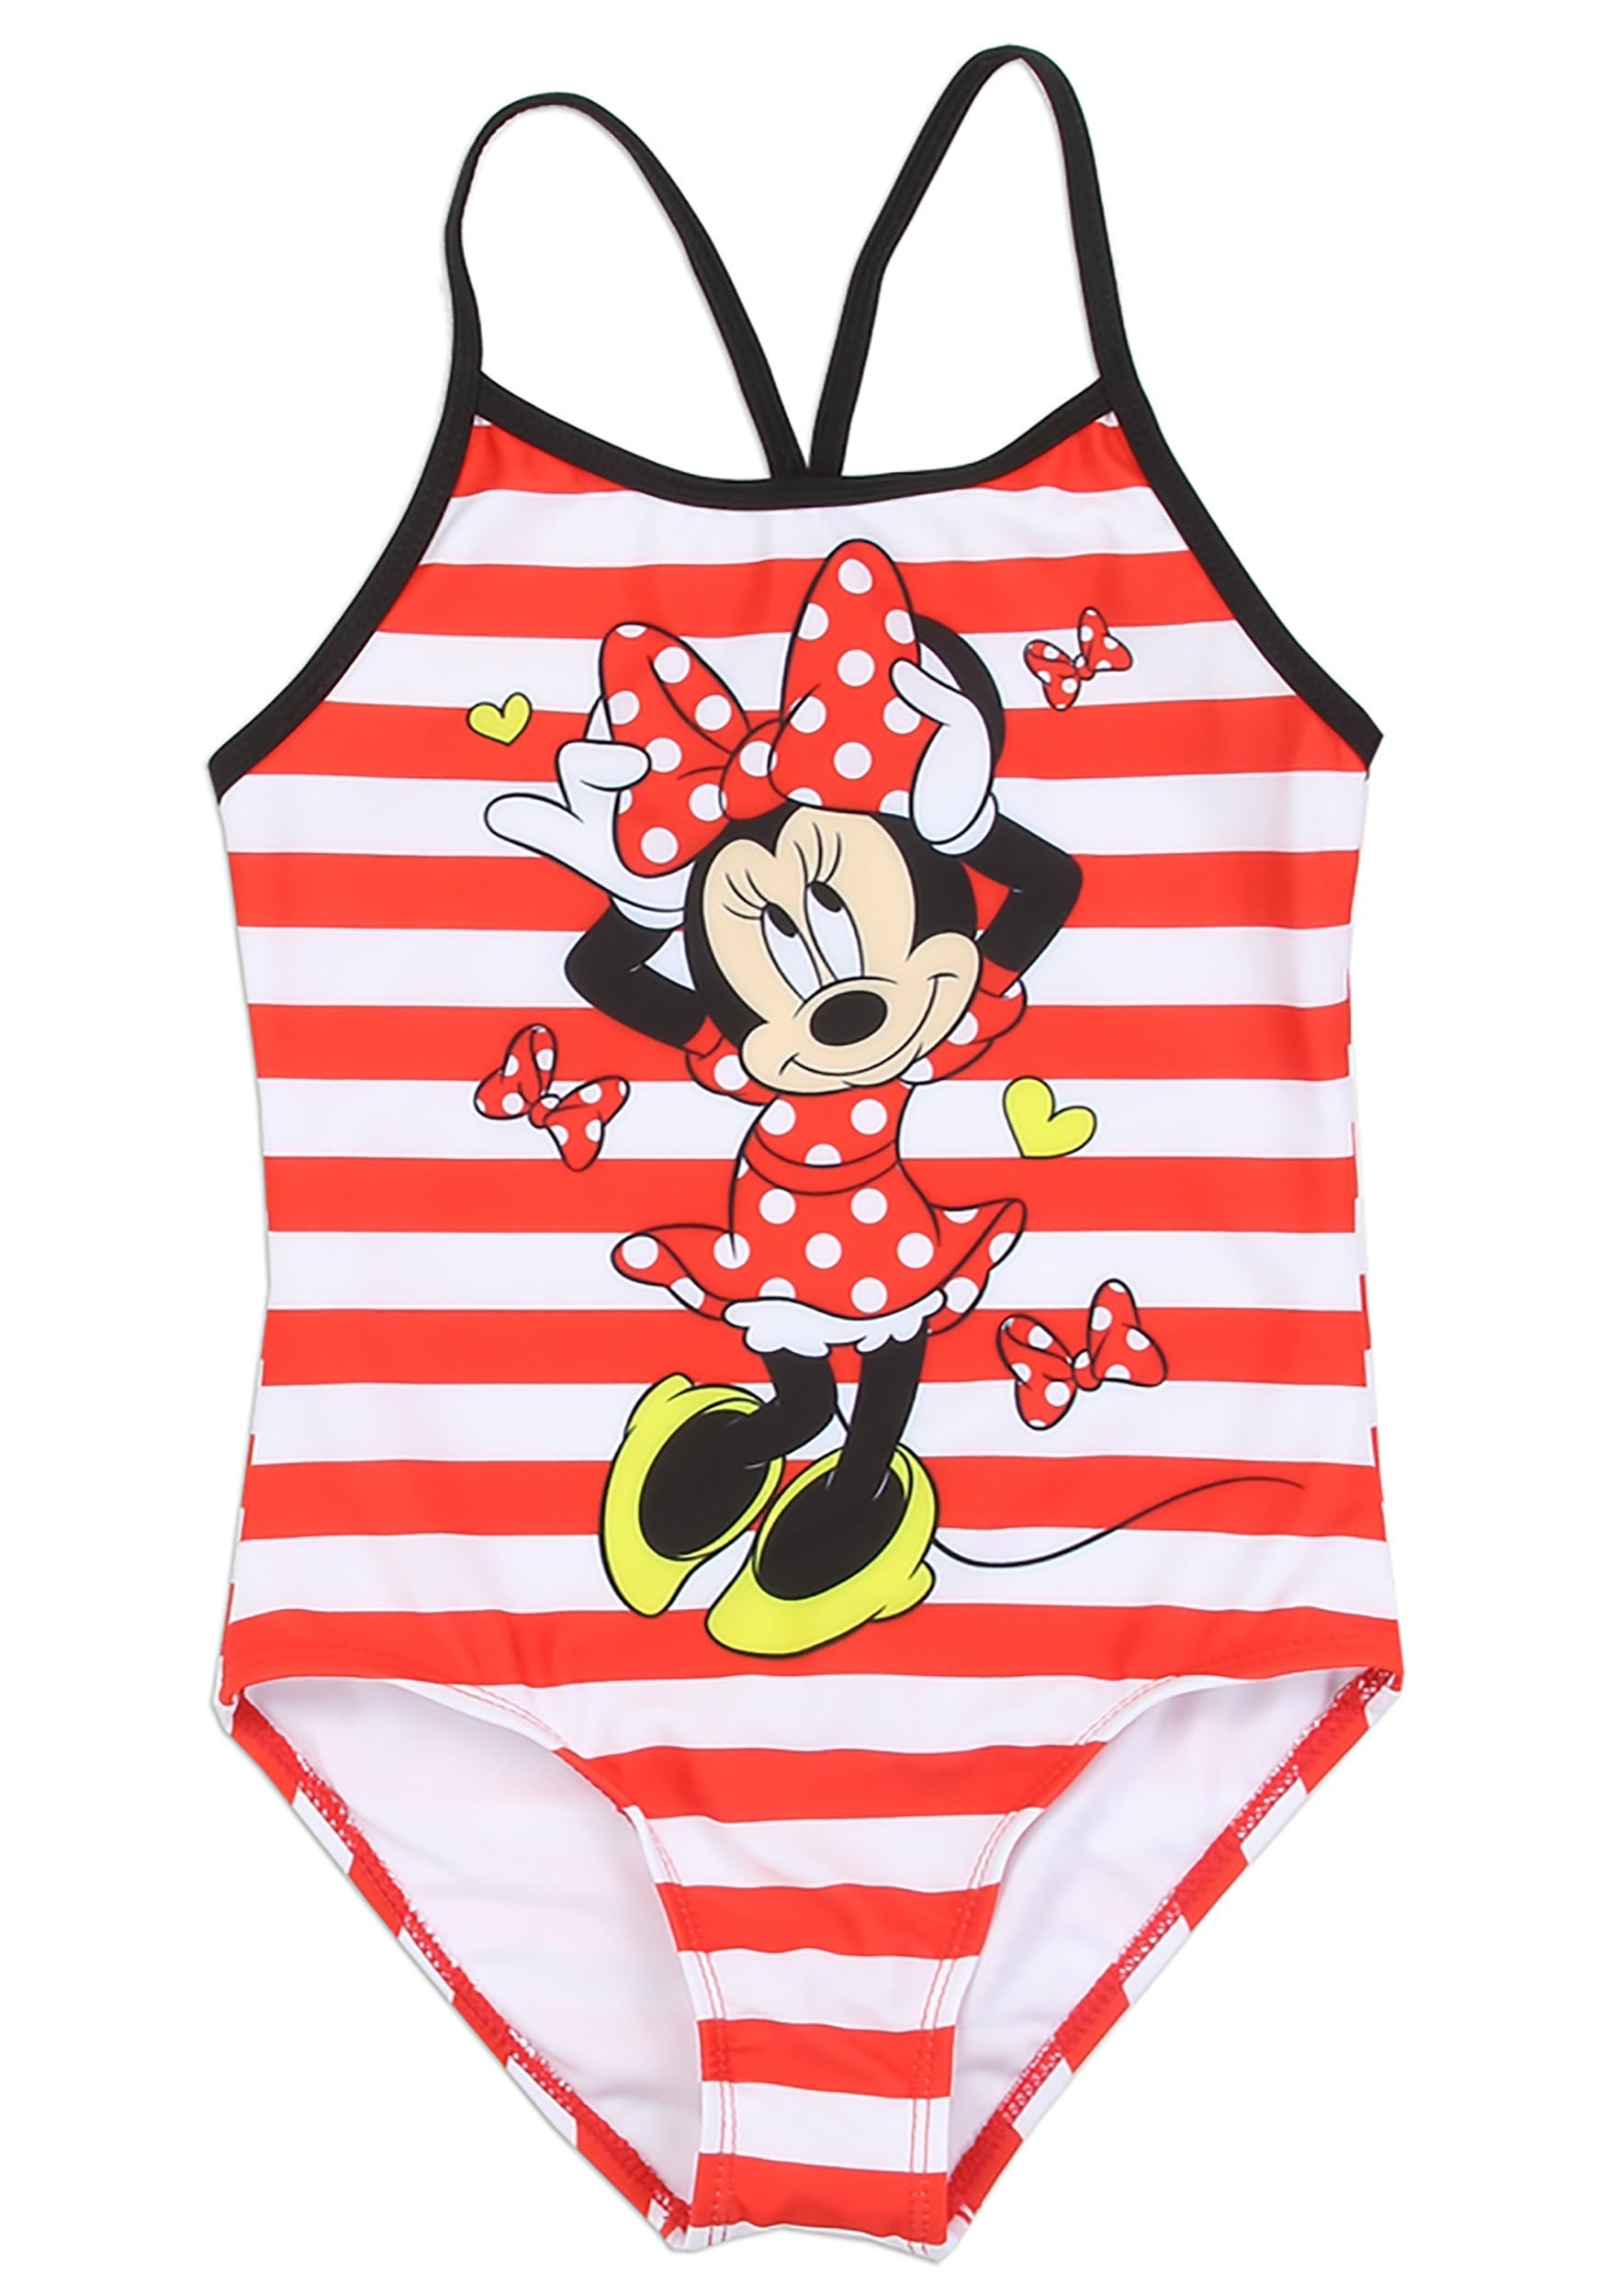 Minnie Mouse Minnie Mouse Girls' Bathing Suit One Piece